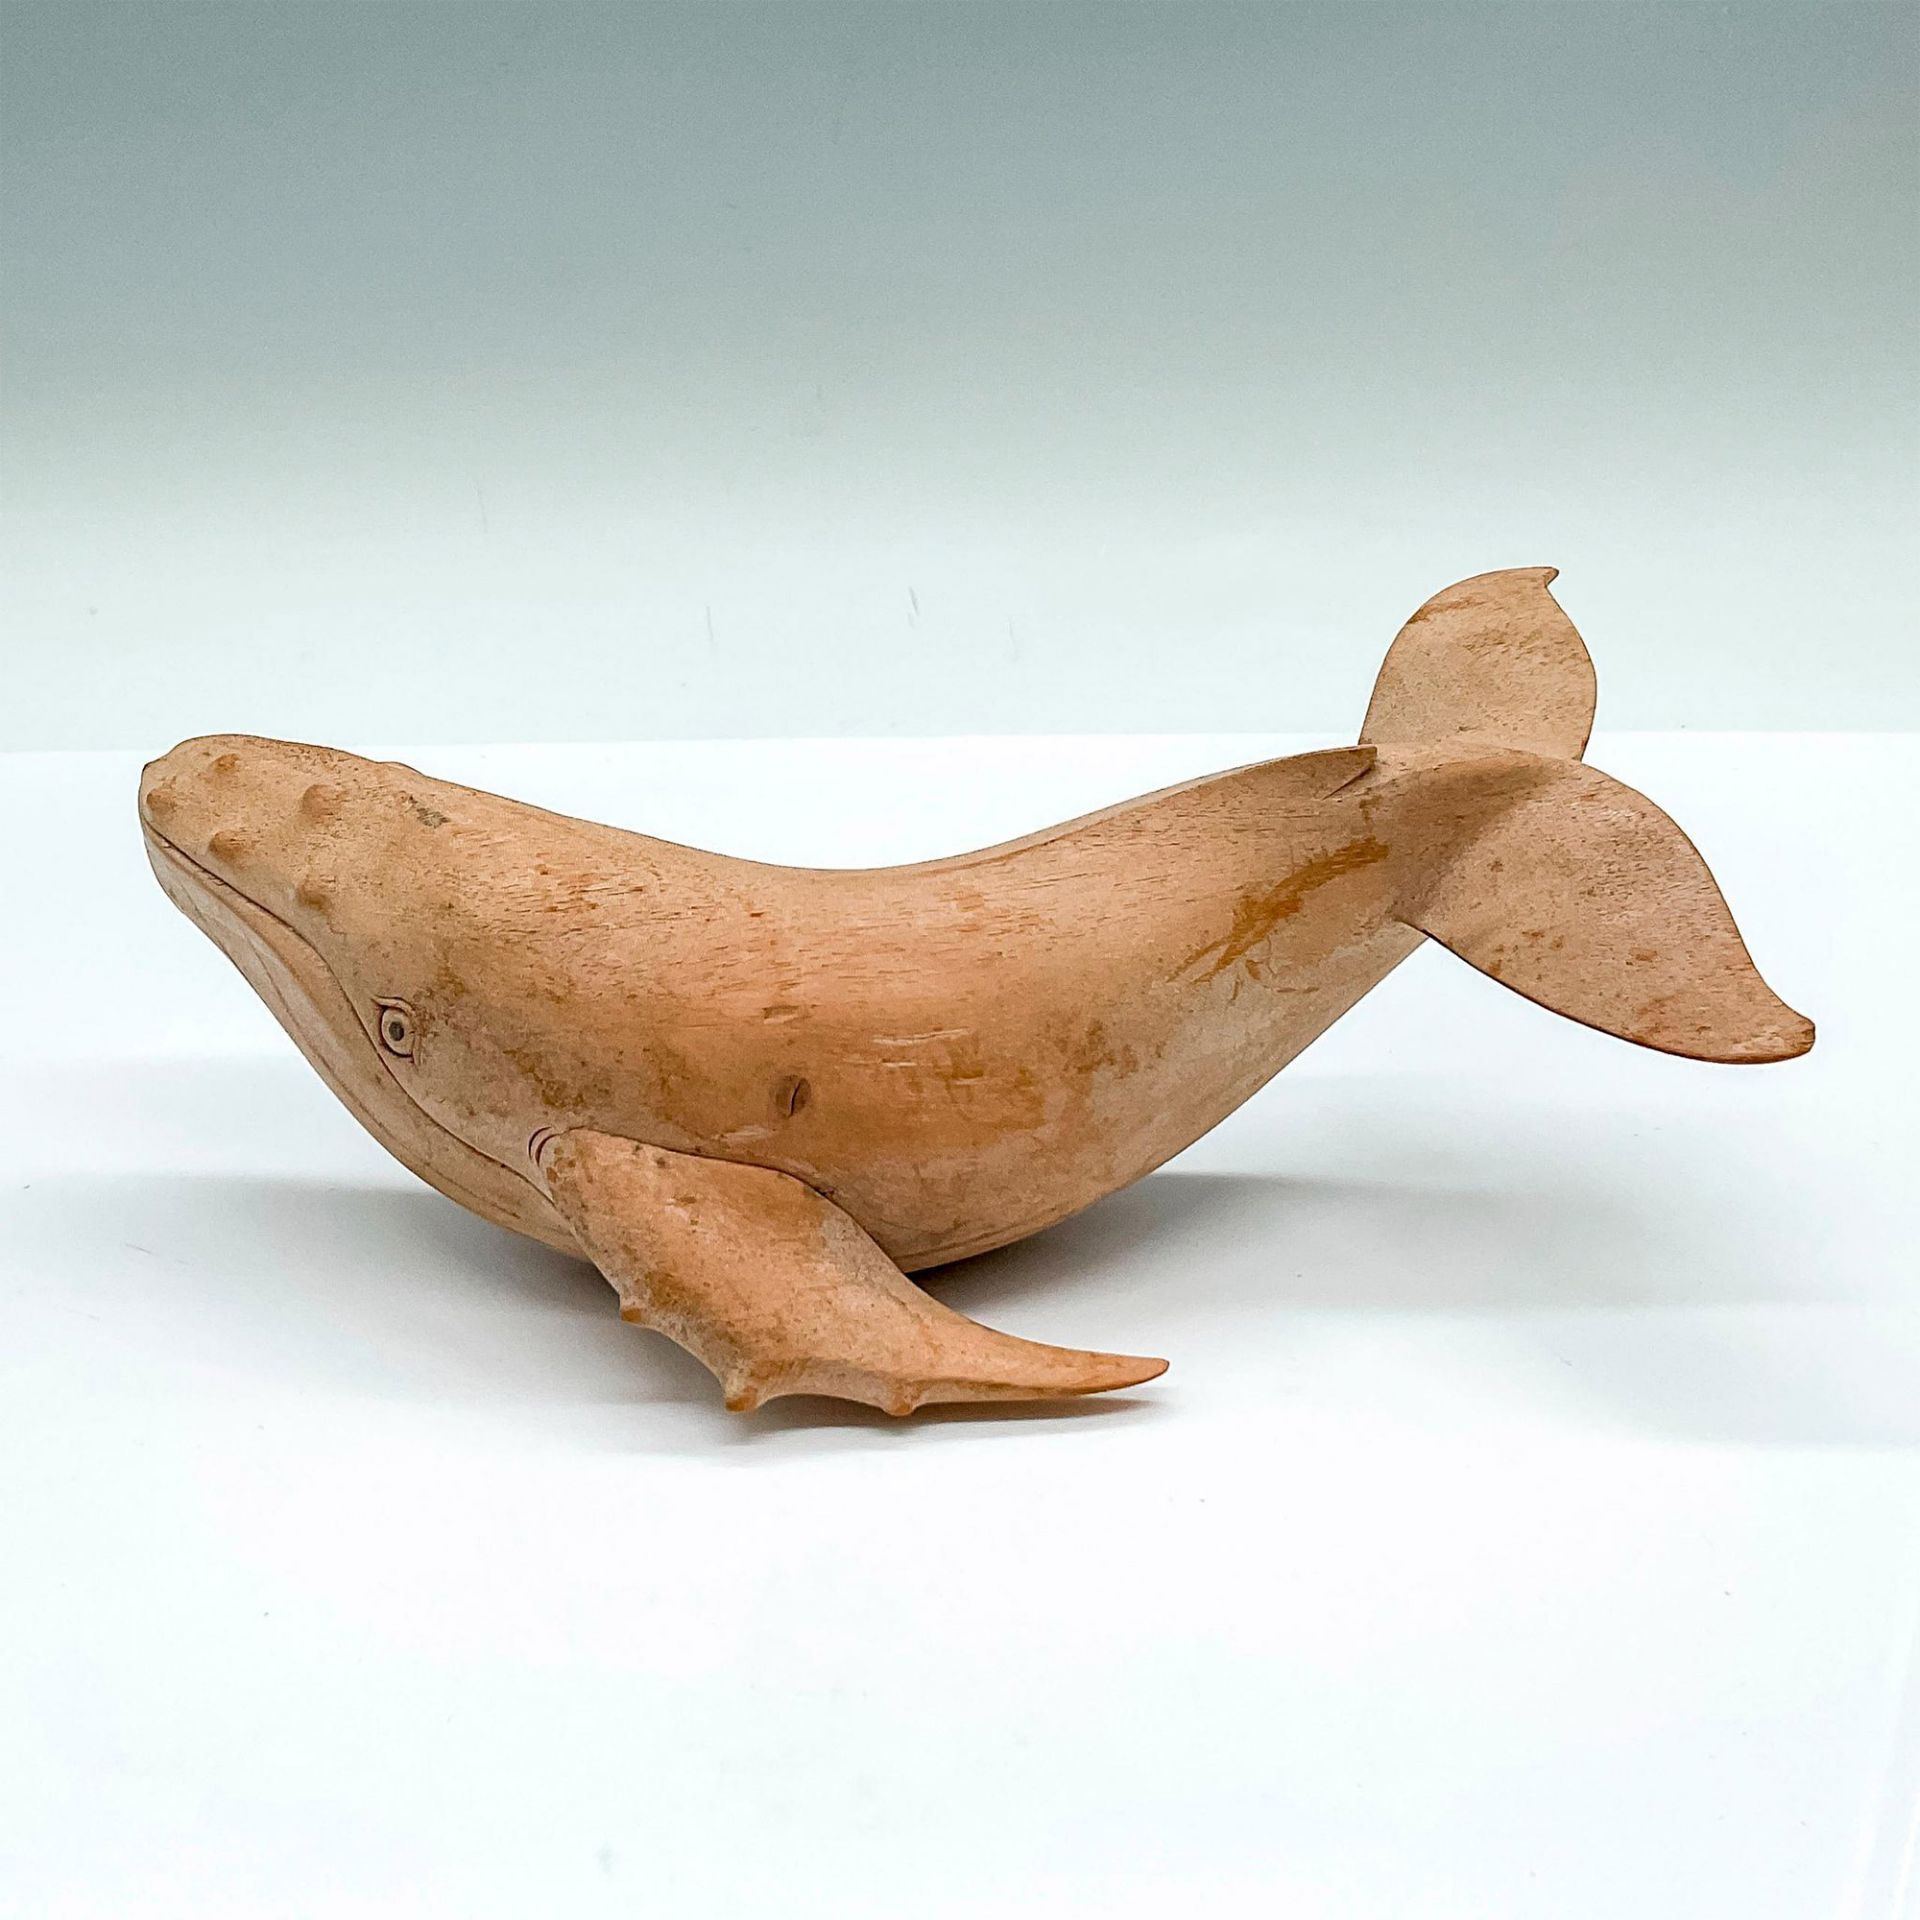 Vintage Hand Carved Wooden Whale Figurine - Image 2 of 3